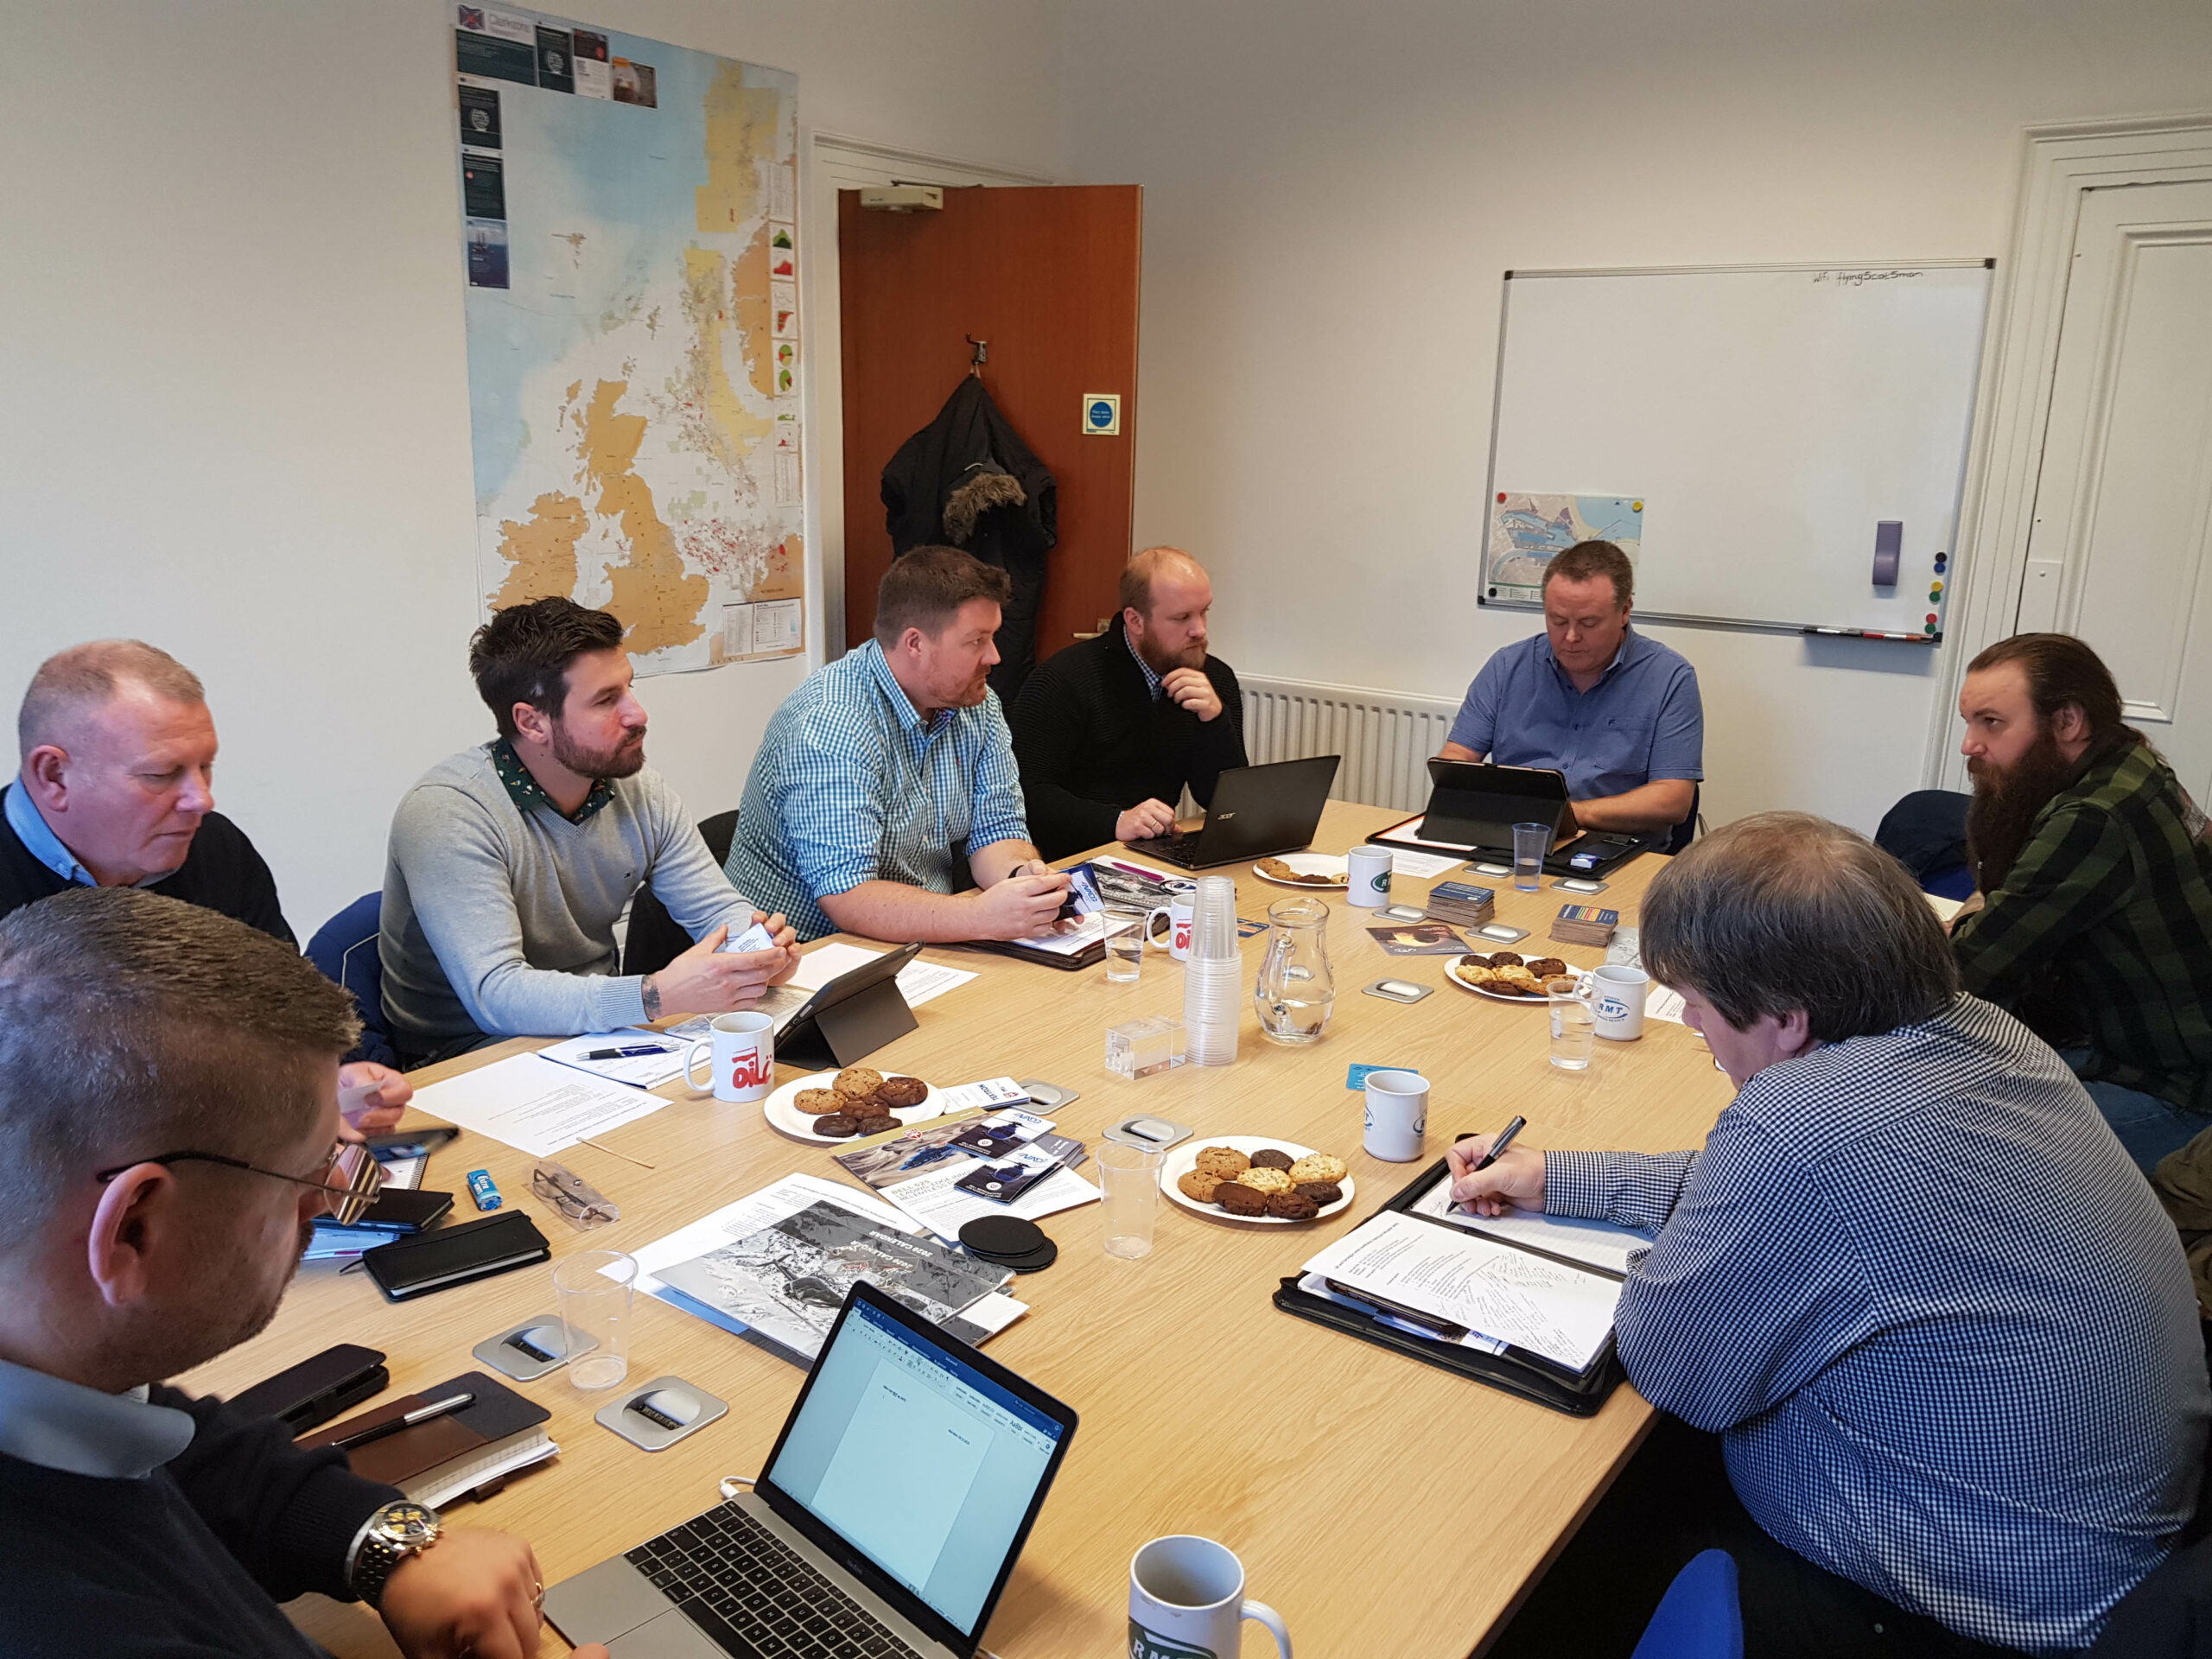 Already at the first meeting, it was agreed to establish a formalized cooperation across the border in the North Sea. Photo: Atle Espen Helgesen